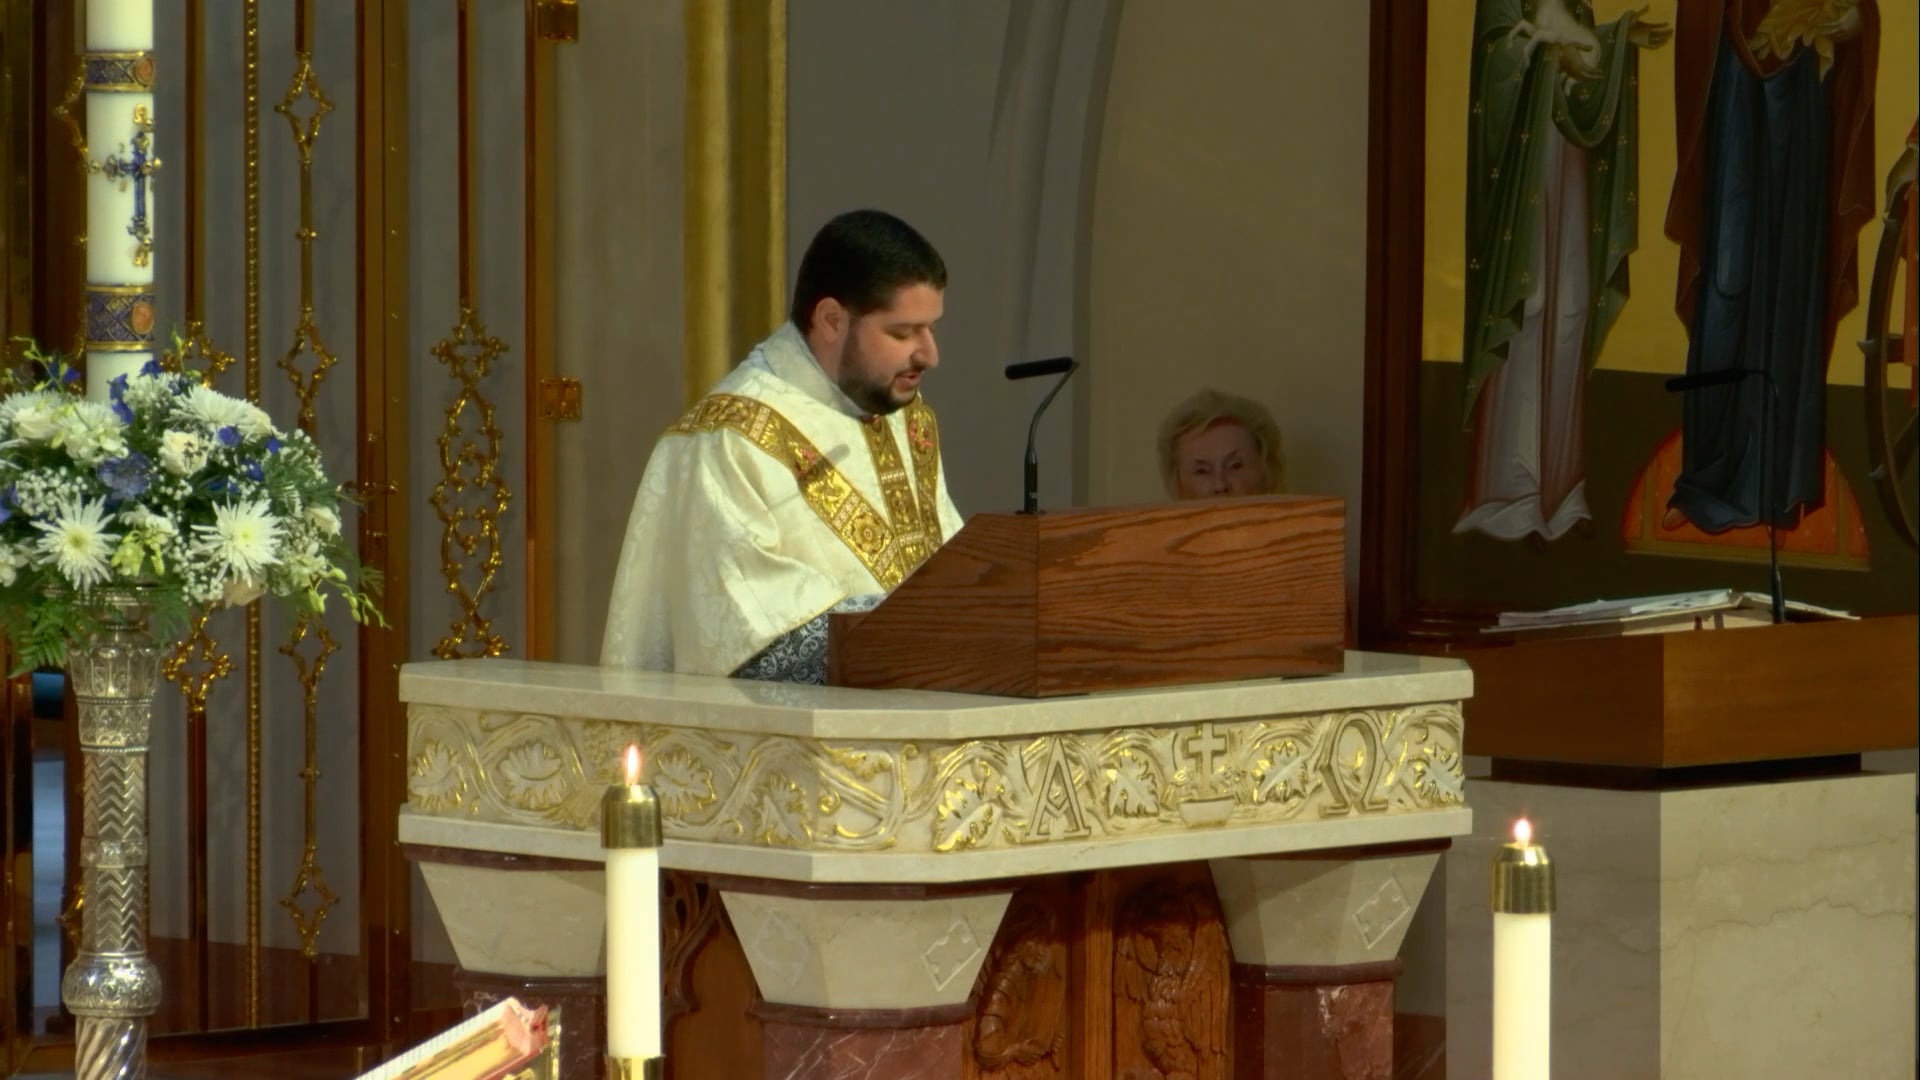 Fr. Alessandro da Luz's Homily for the Fifth Sunday of Easter